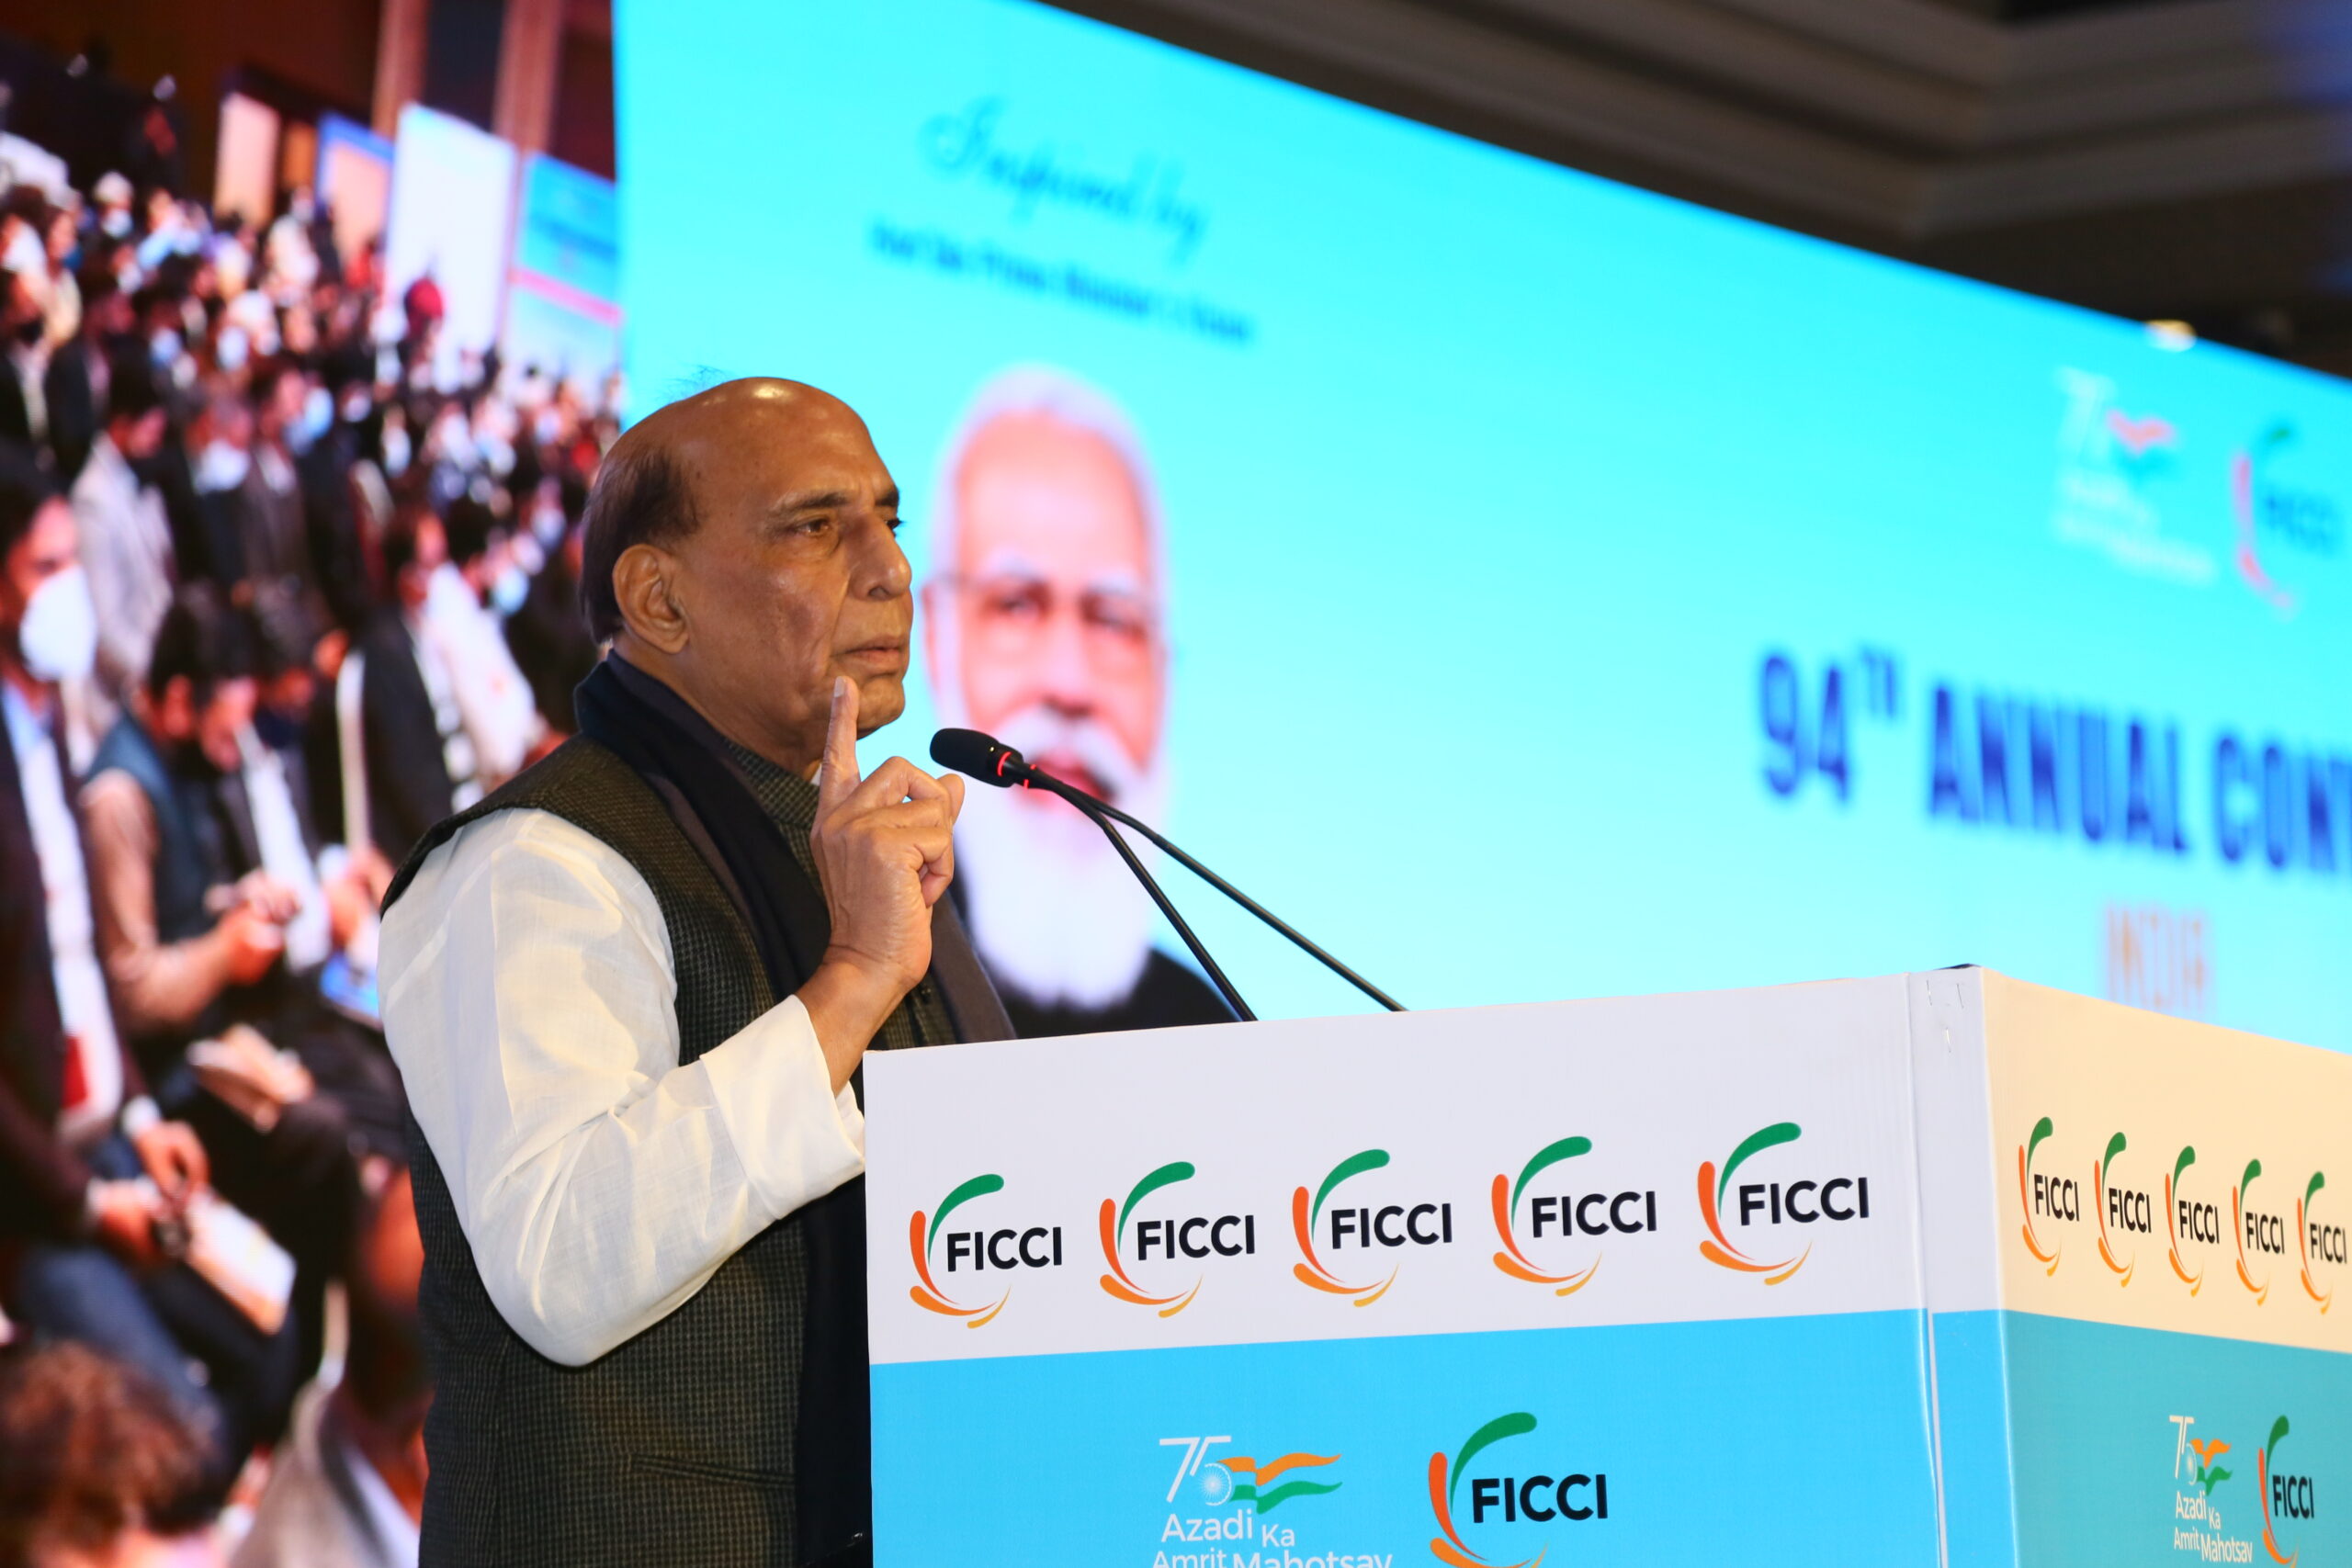 Indian Defence Industry Gearing Up To Deal With Security Threats: Rajnath Singh